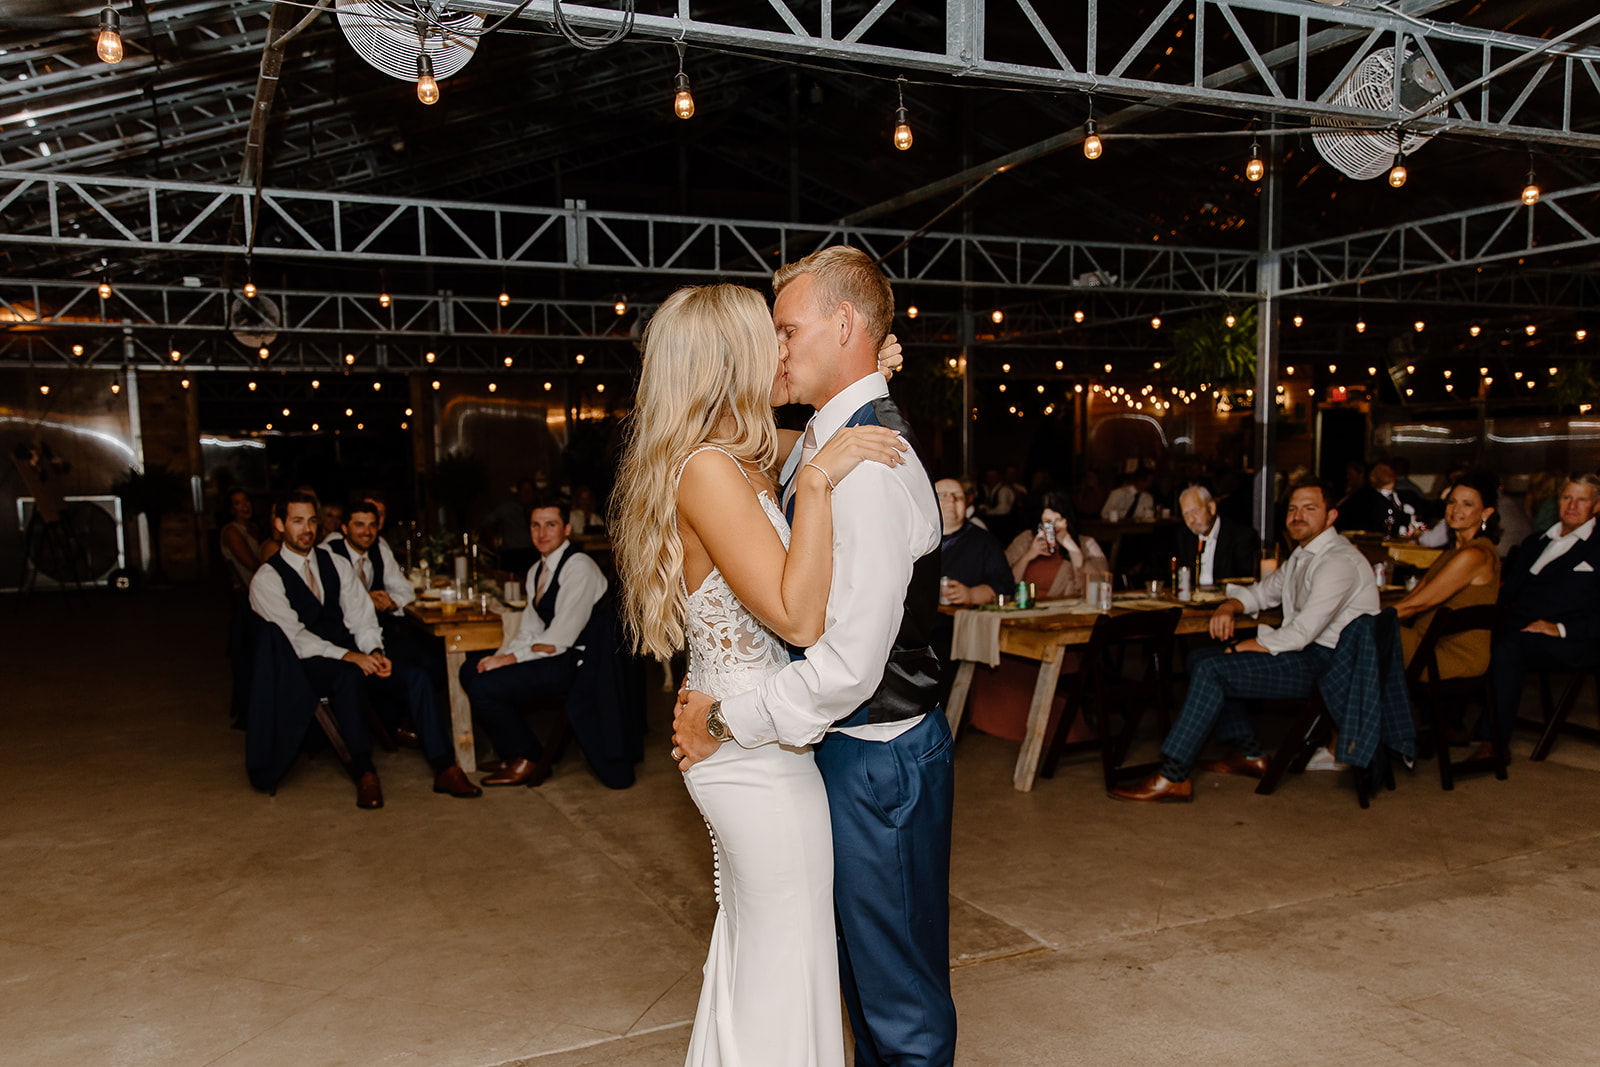 Bride and groom share their first dance